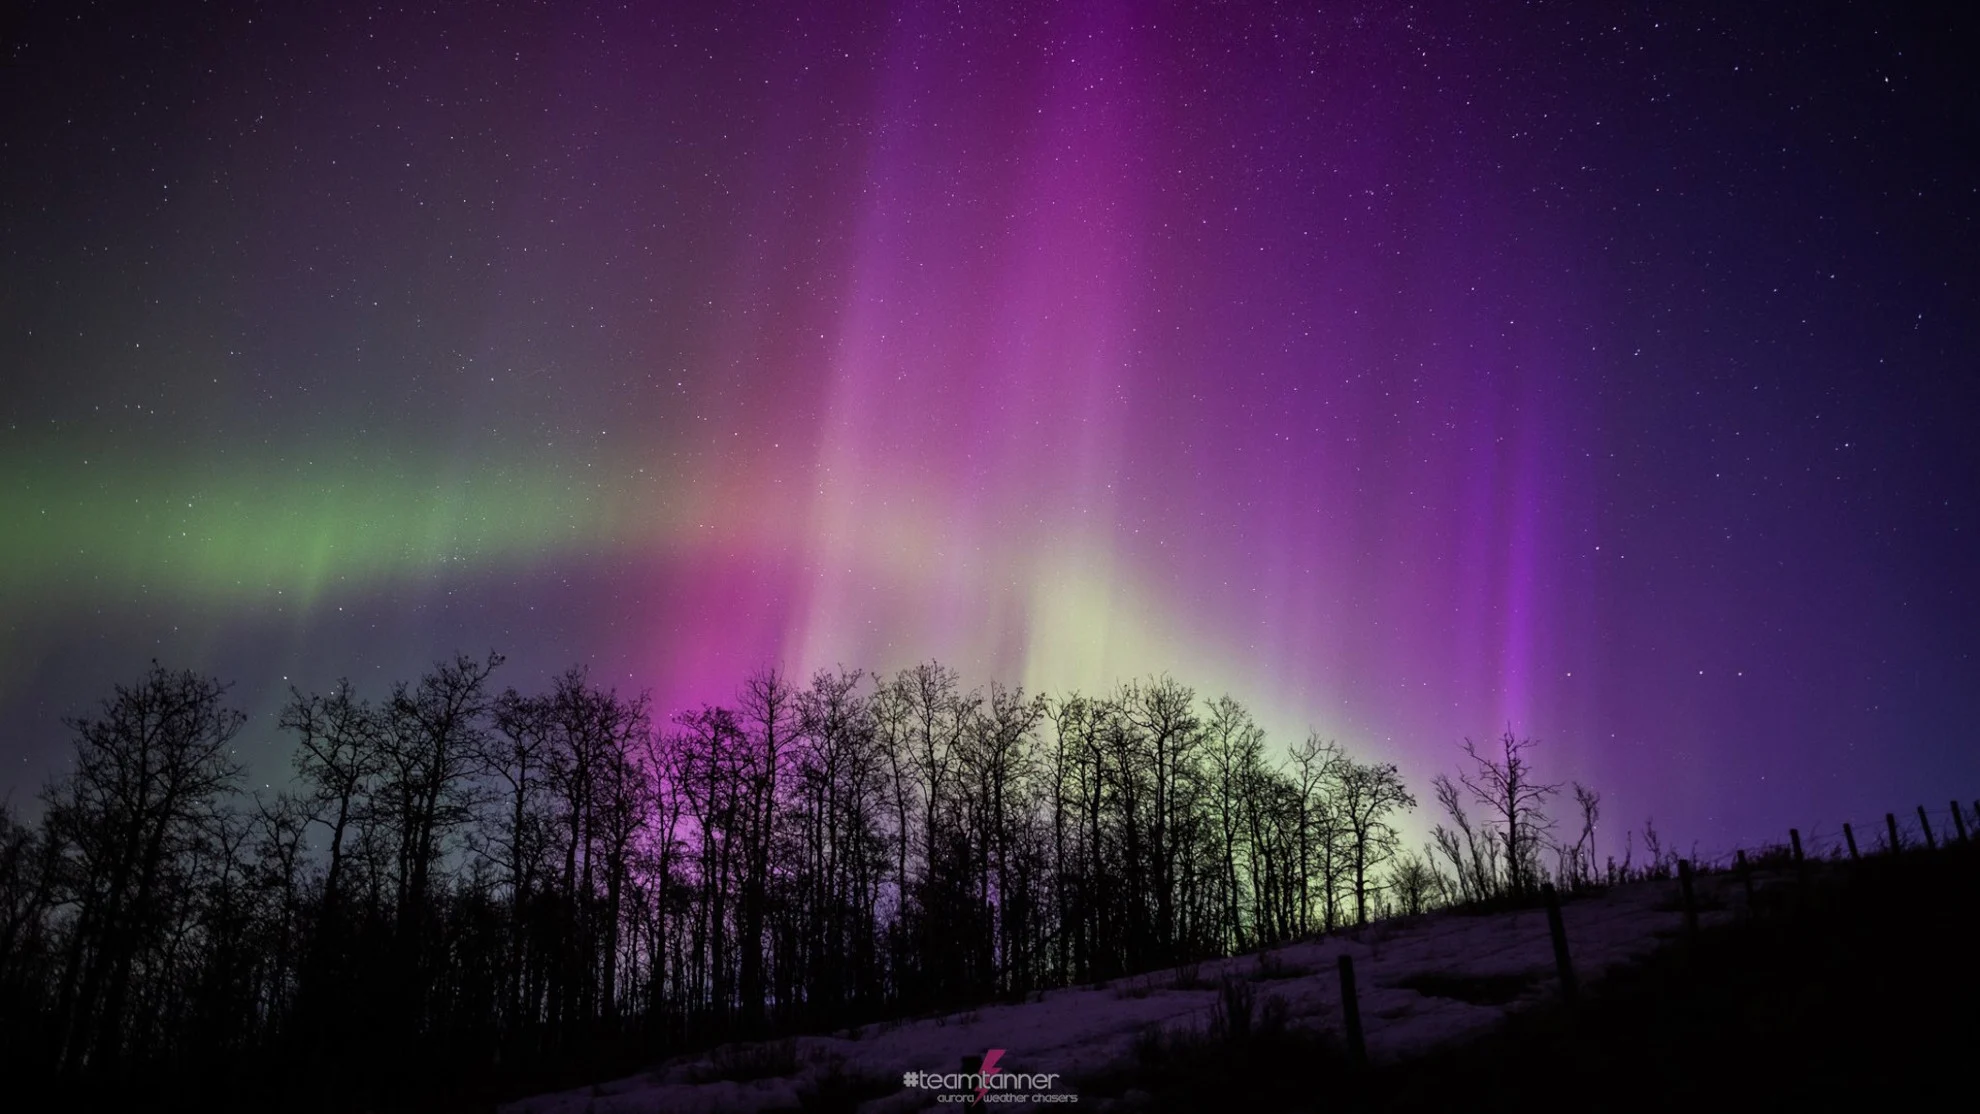 Look up! Bright auroras possible across Canada Friday night